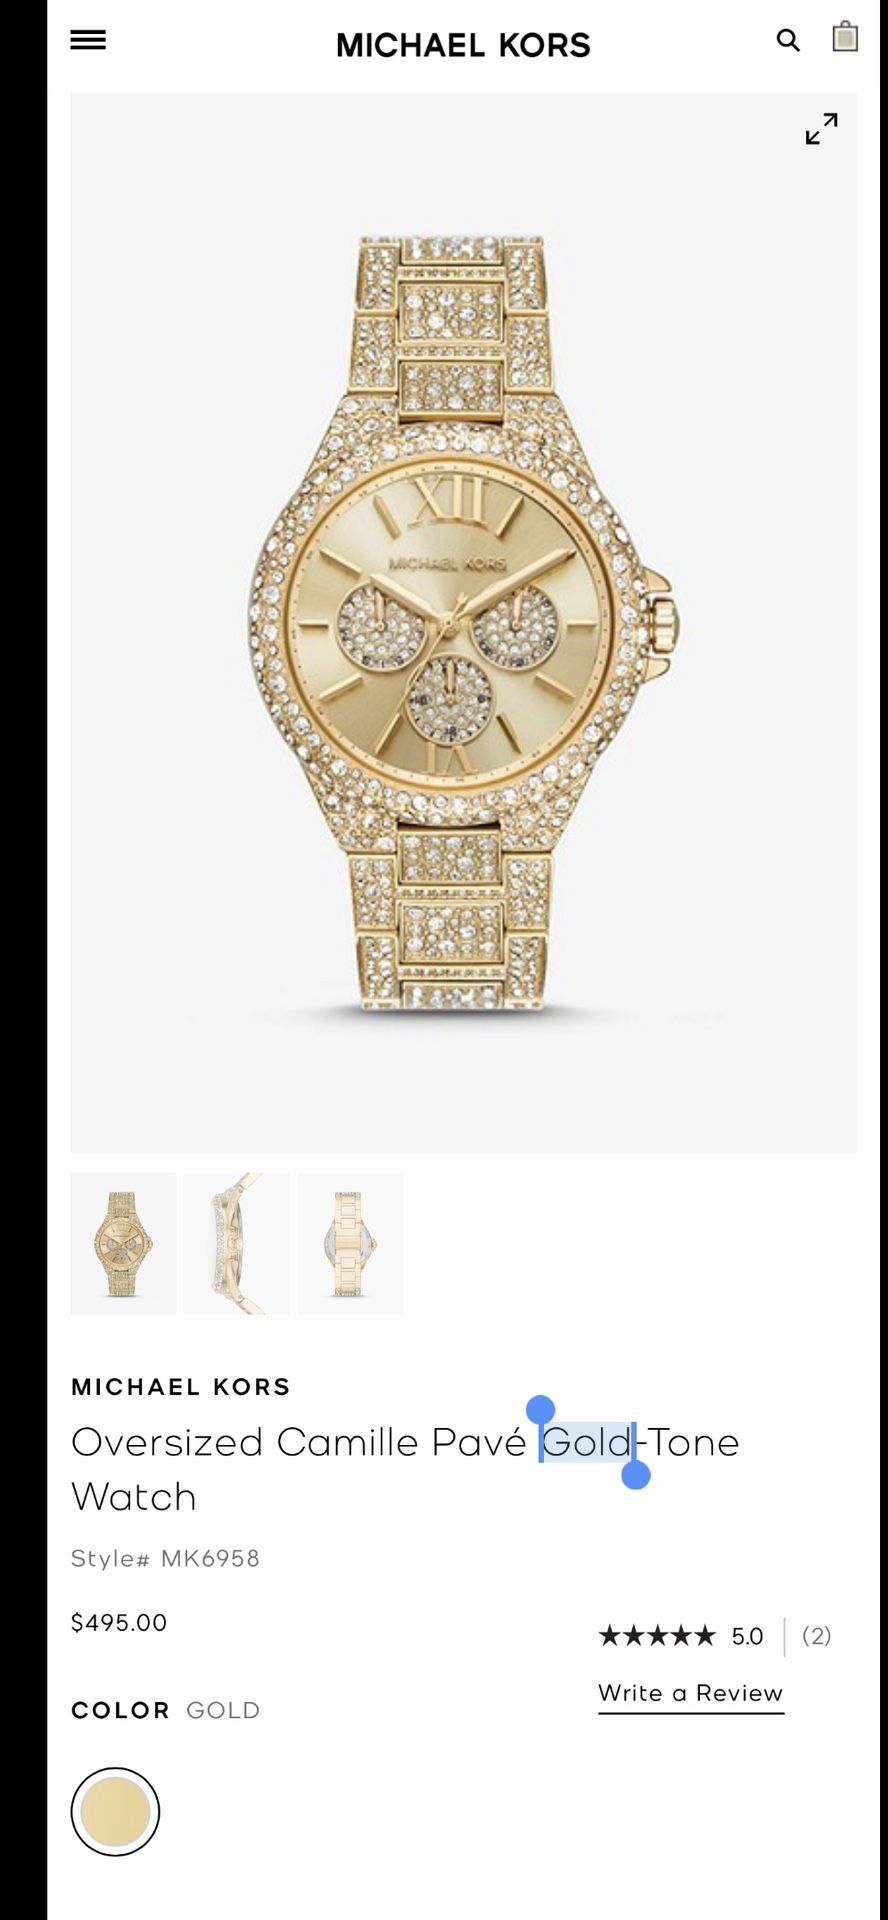 MICHAEL KORS Oversized Camille Pavé Gold-Tone Watch for Sale in